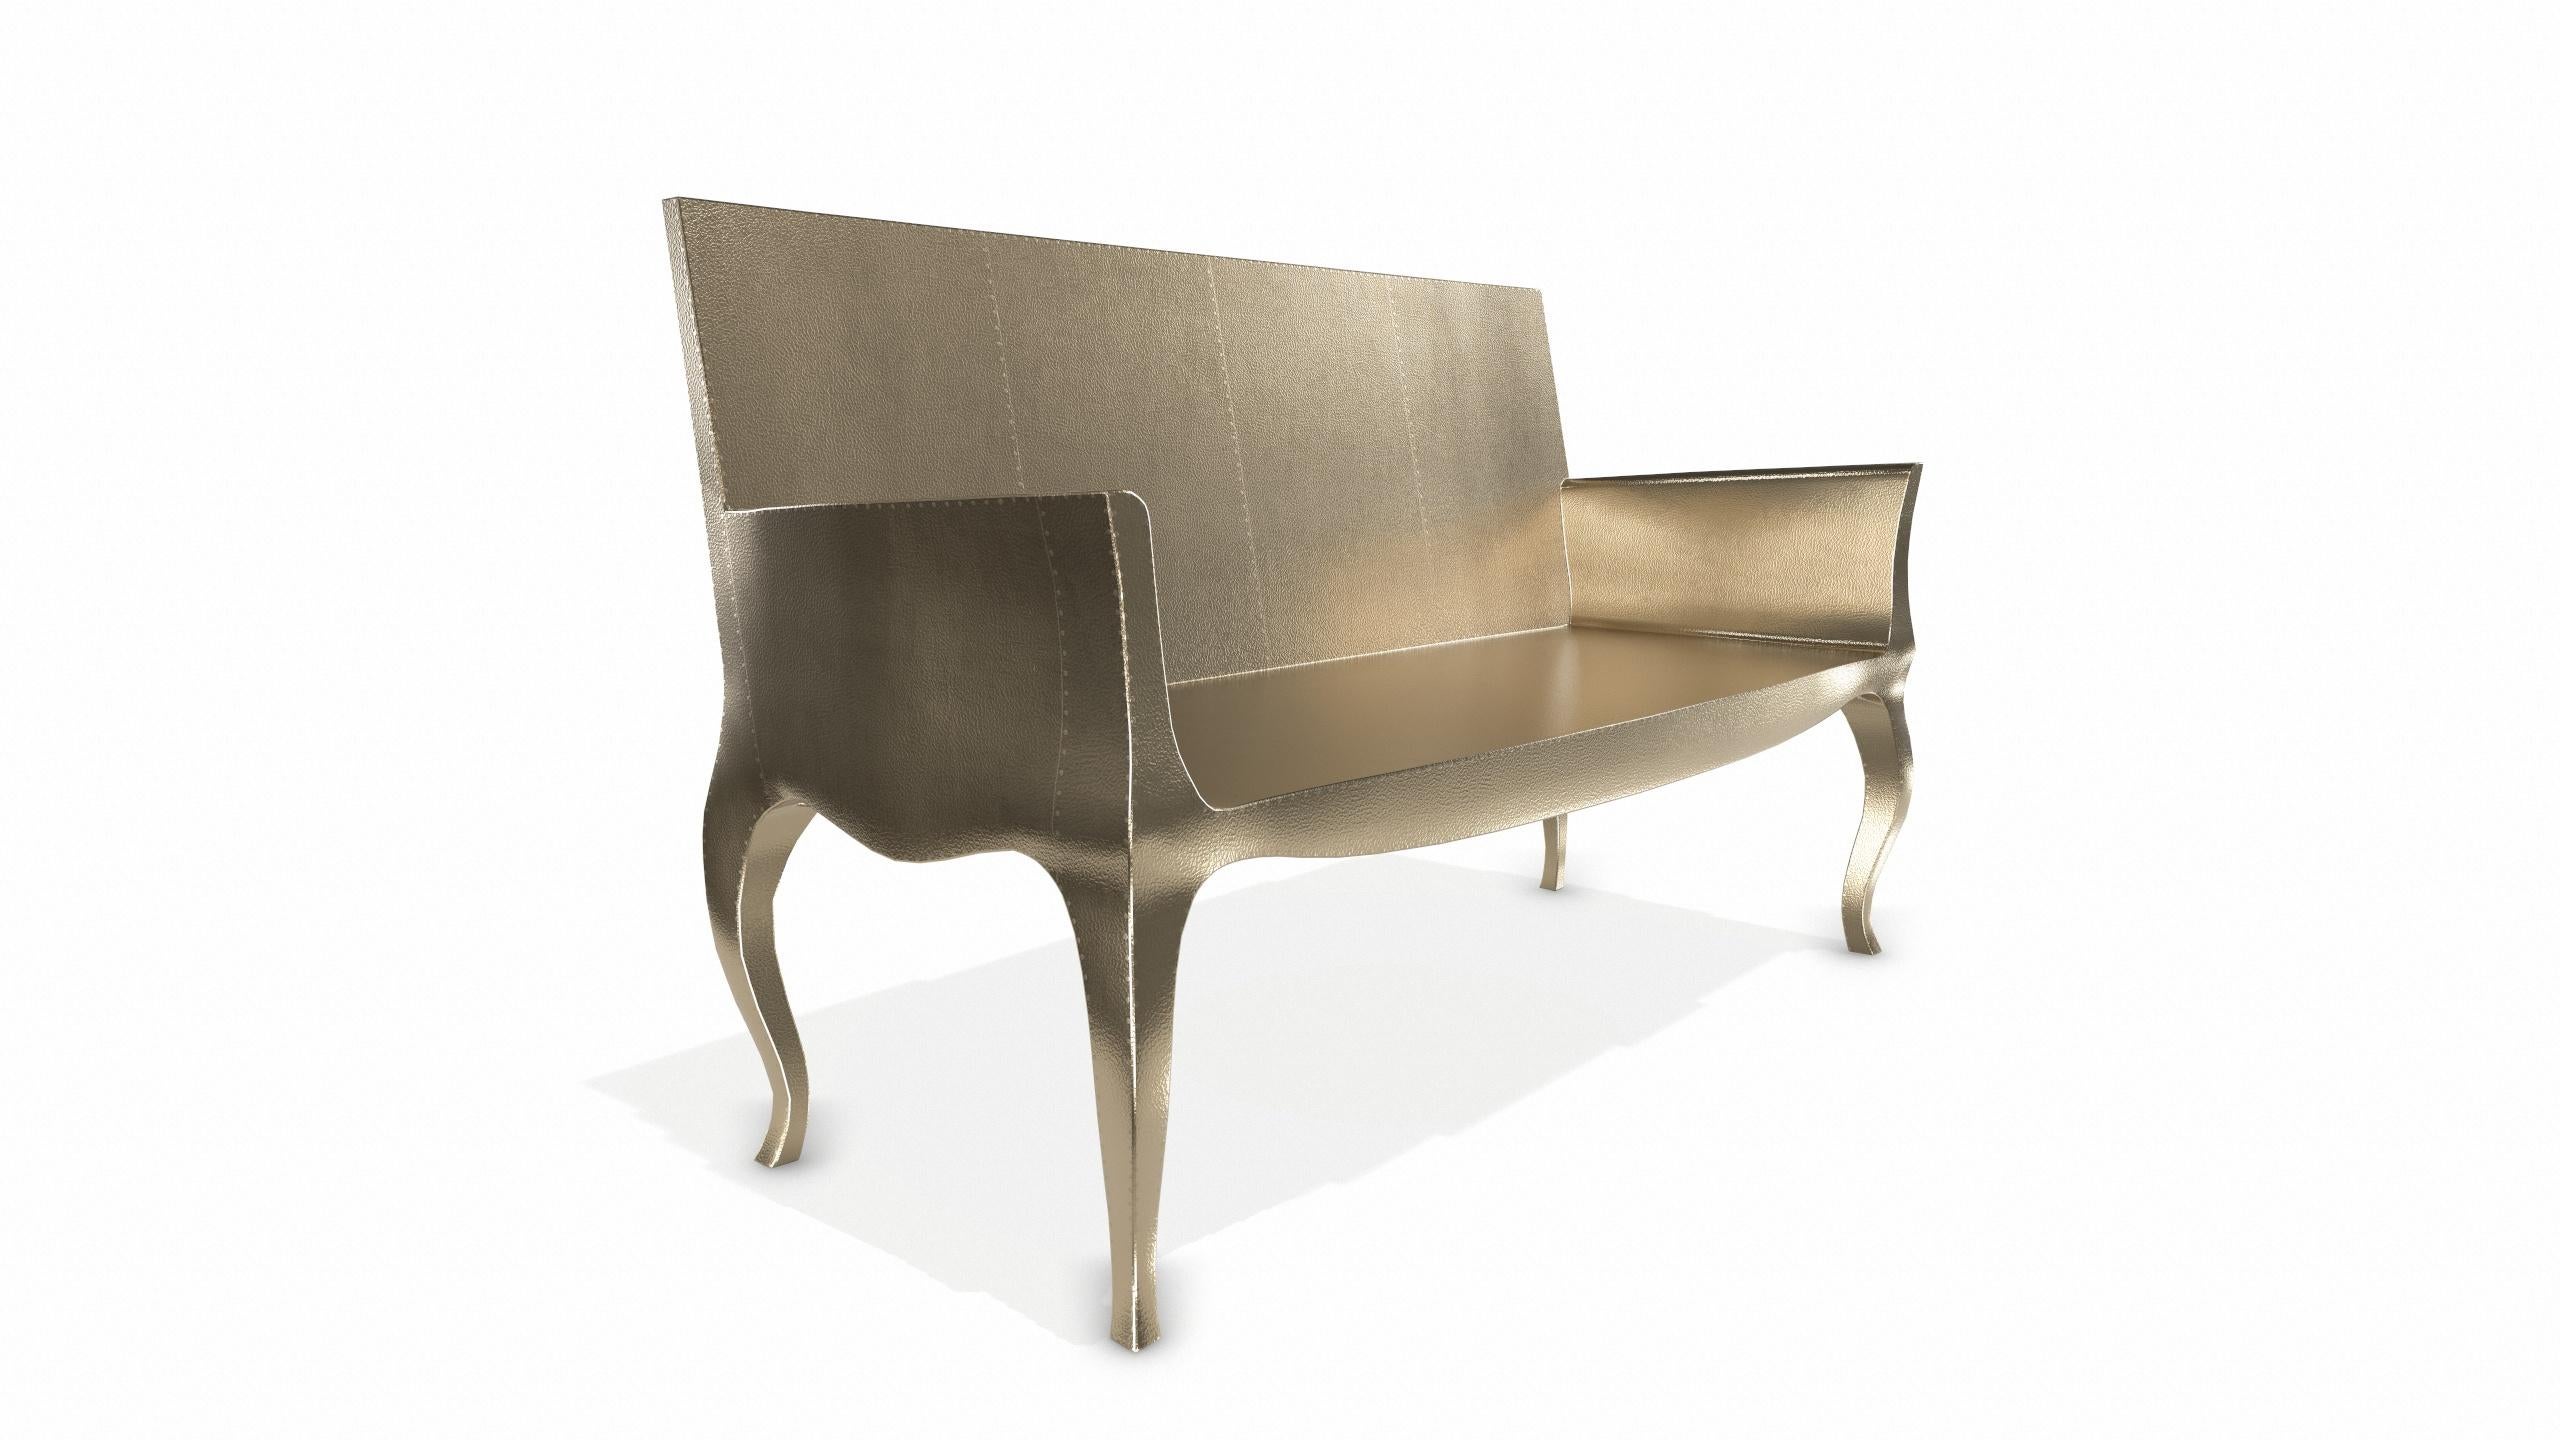 Louise Settee Art Deco Benches in Fine Hammered Brass by Paul Mathieu In New Condition For Sale In New York, NY